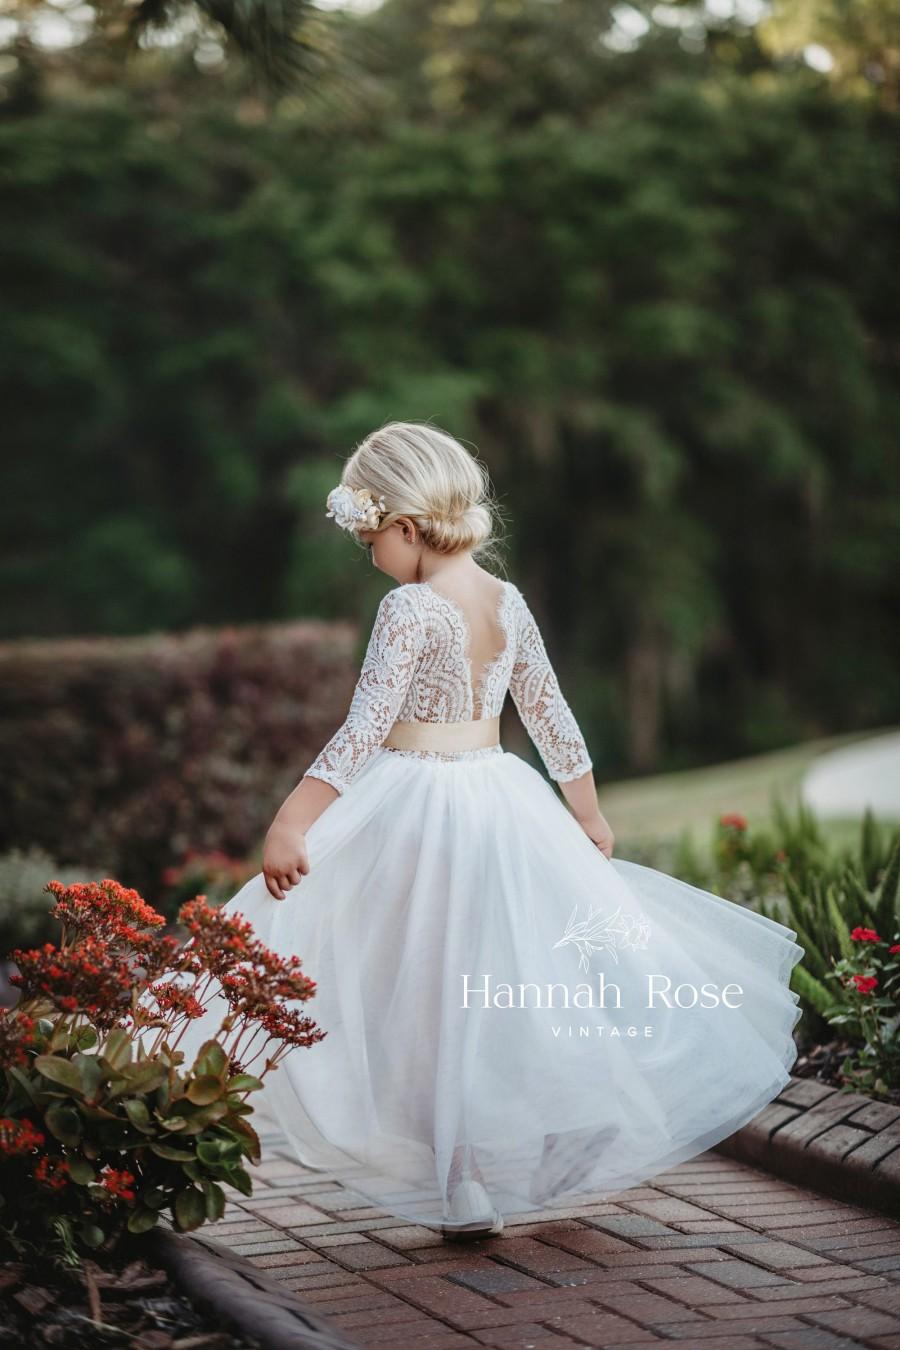 Wedding - Beautiful White or Ivory Flower Girl Dress, Long Flowing Flower Girl Gowns, Boho Vintage Country Style Flower Girl Dresses, Tulle and Lace